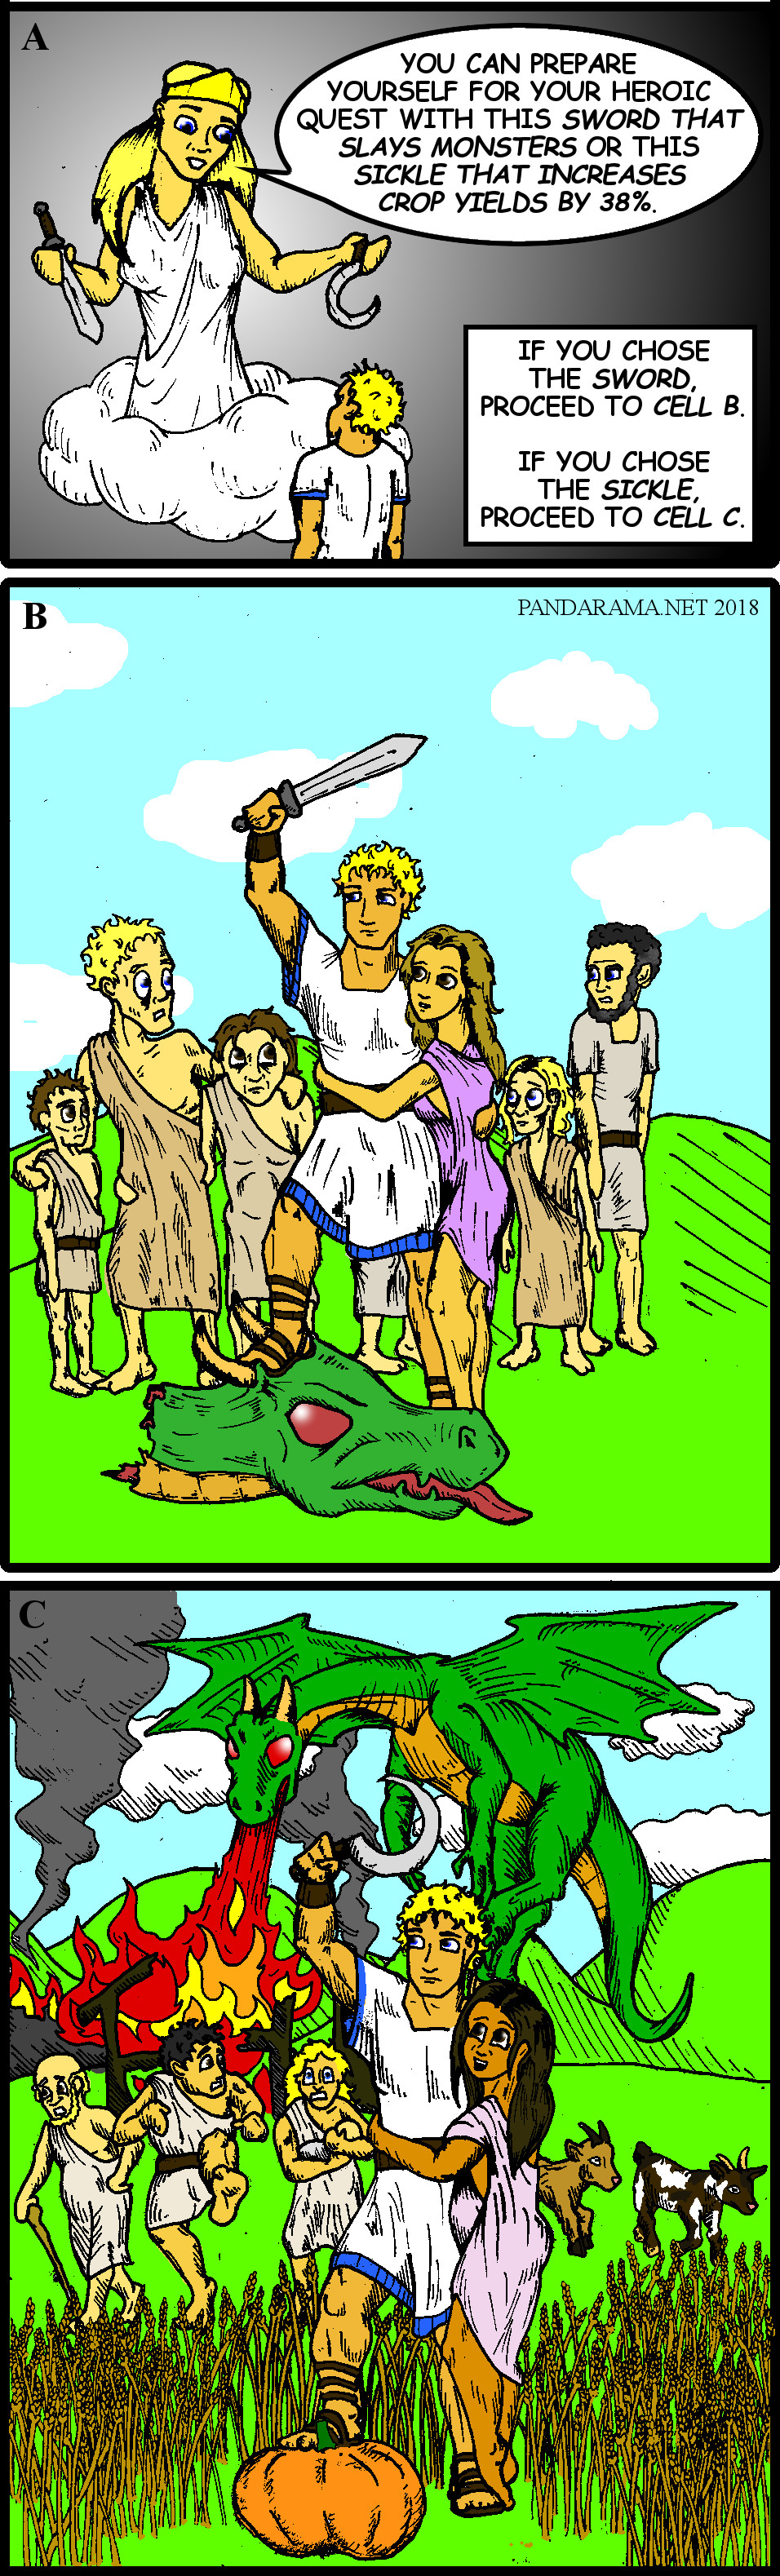 perhaps the first choose-your-own-adventure webcomic strip, a goddess gives the hero a choice between a sword that slays monsters and a sickle that improves crop yields. If you choose the sword, you slay the dragon and the people suffer a famine. If you choose the sickle, the dragon destroys the village. Either way, you are the hero.